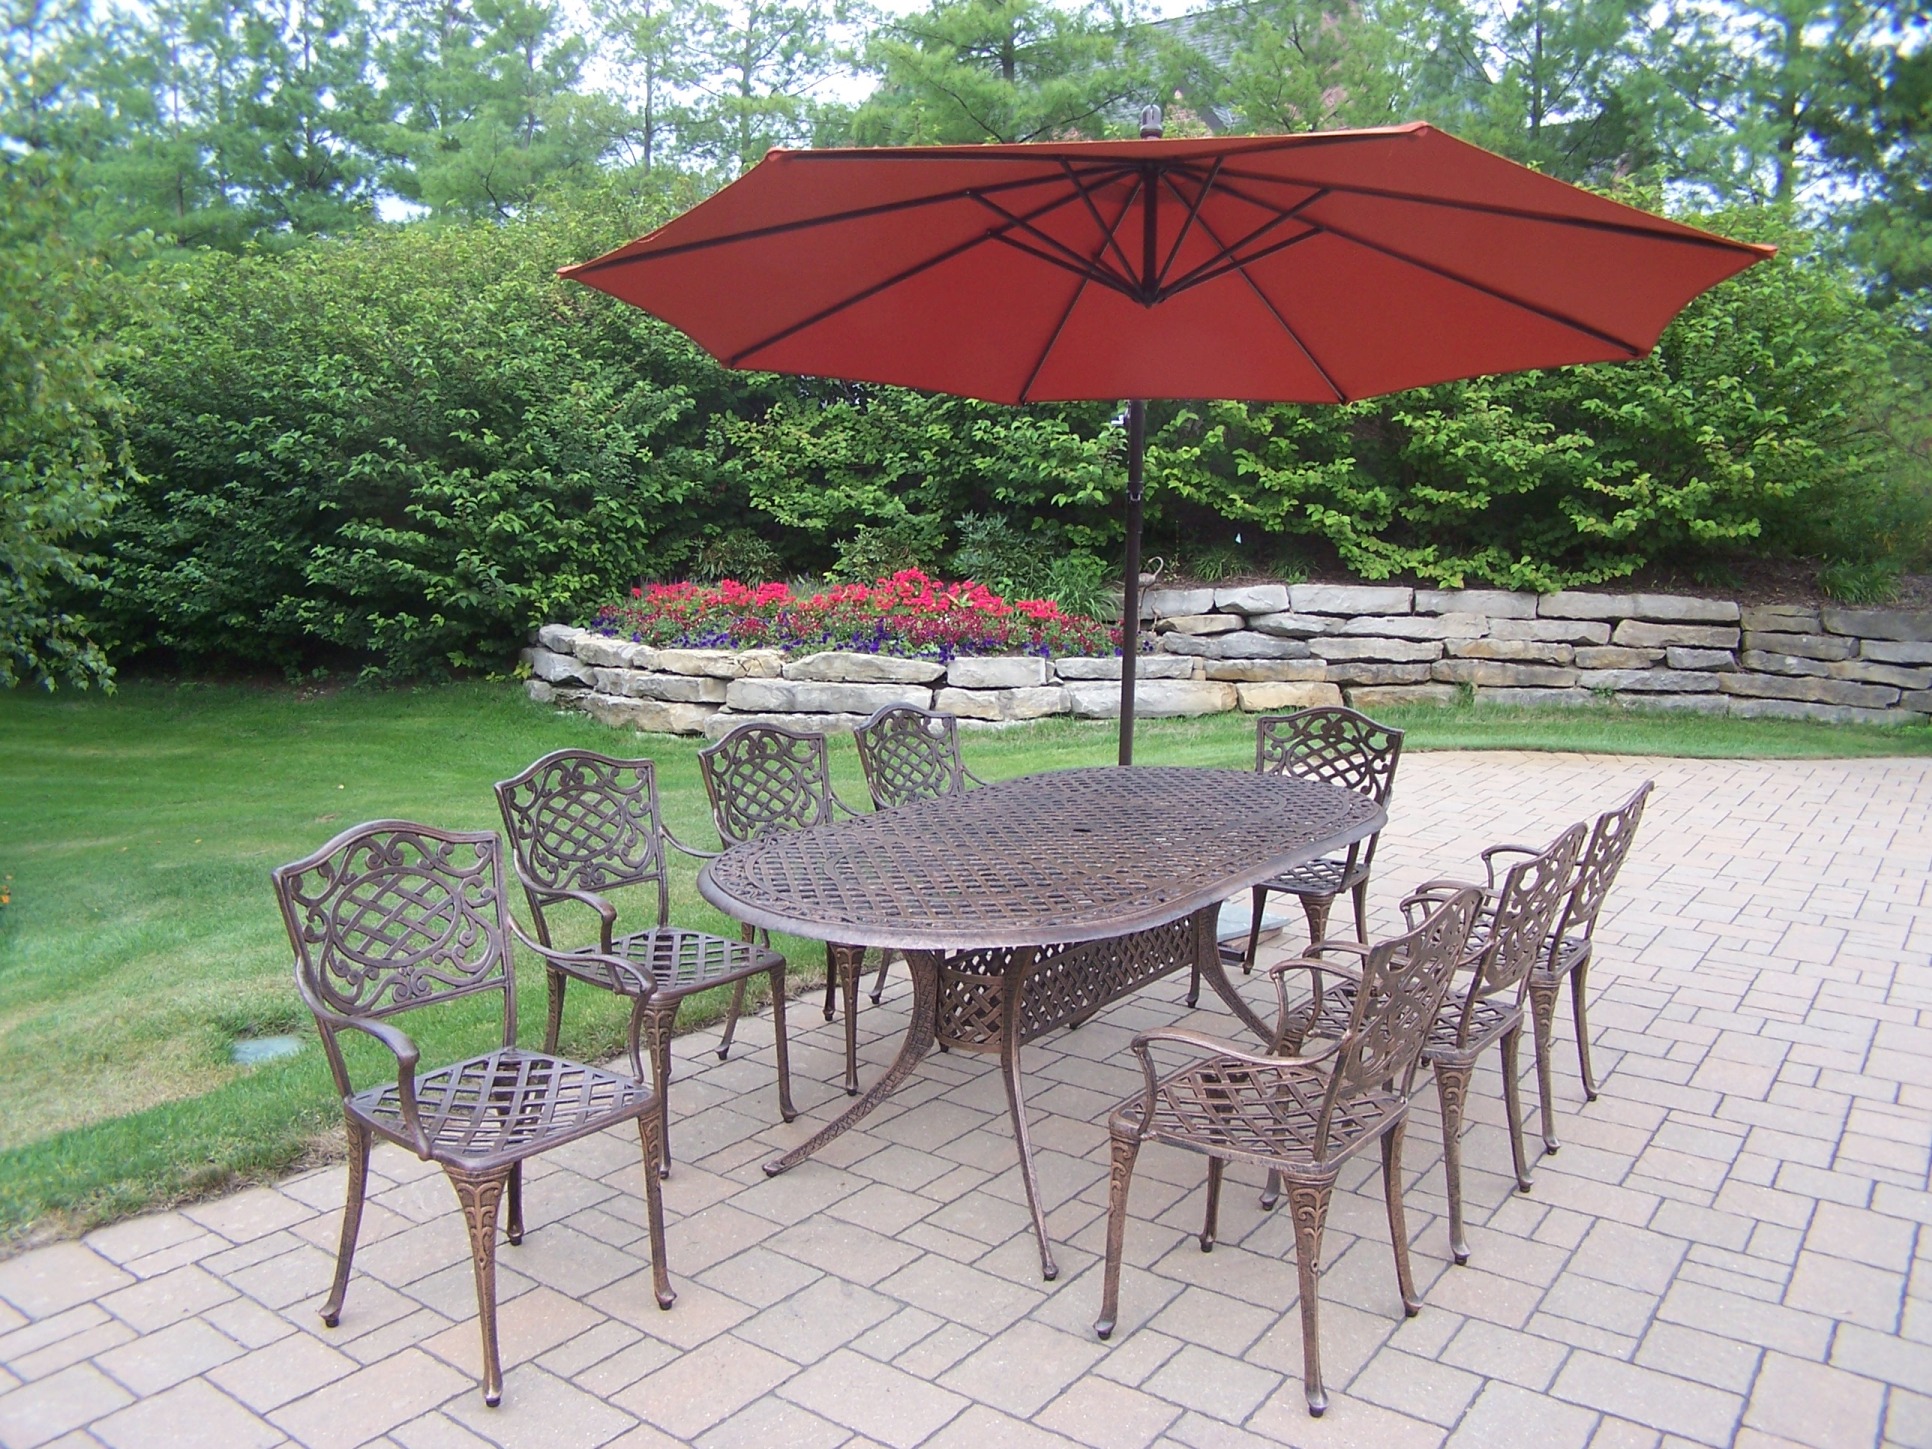 Oakland Living Cast Aluminum Patio Dining set w/ 84 x 42" Oval Table, Arm Chairs, Cantilever Umbrella & Base